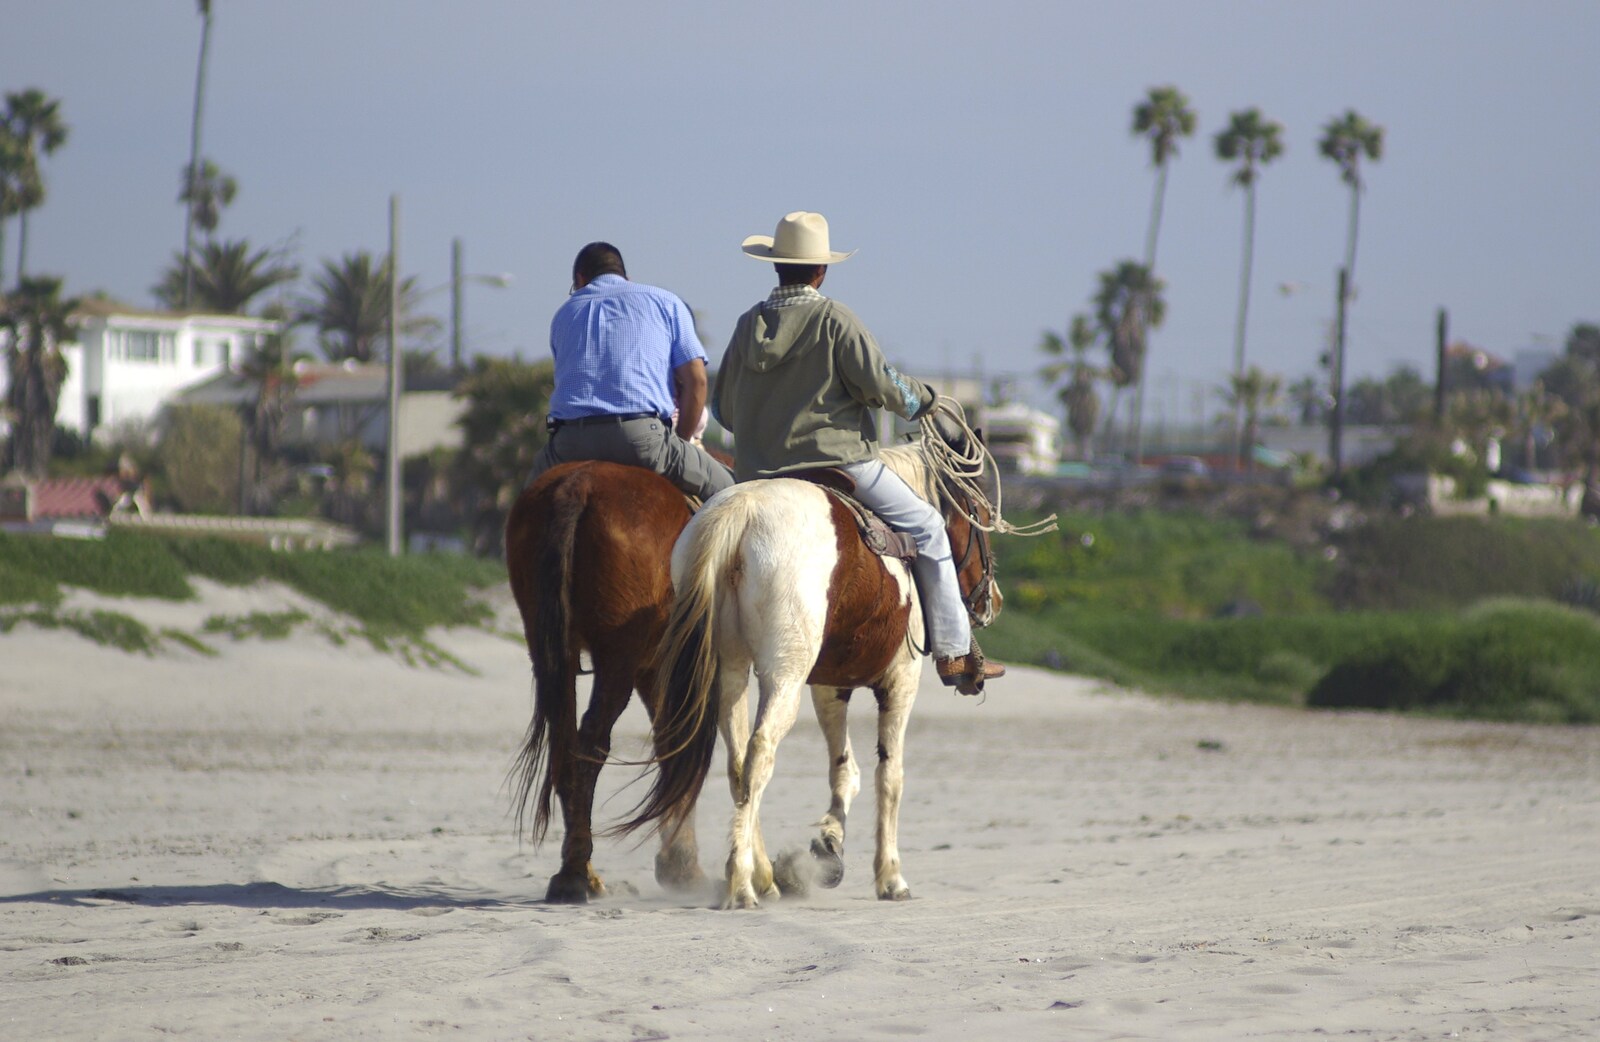 Rosarito and Tijuana, Baja California, Mexico - 2nd March 2008: A couple of ponies trot along the beach